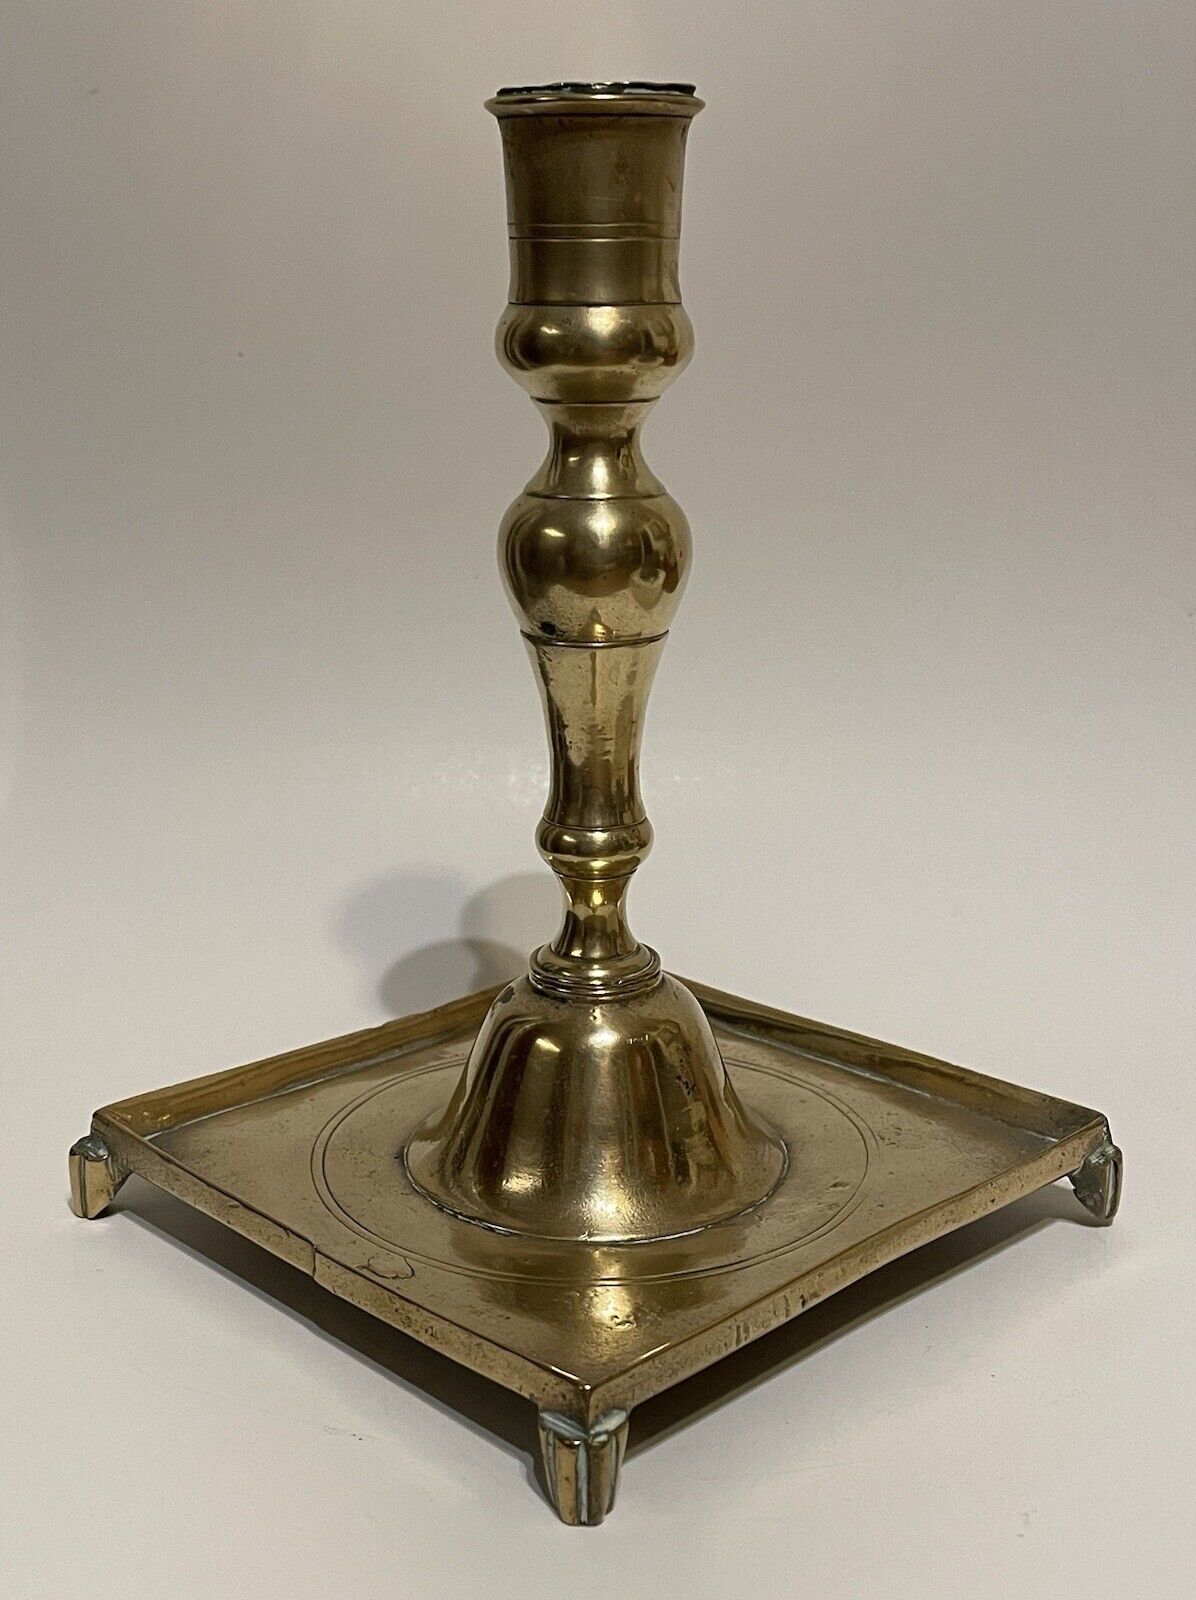 Antique late 17th century brass / copper alloy footed candlestick, ca. 1690